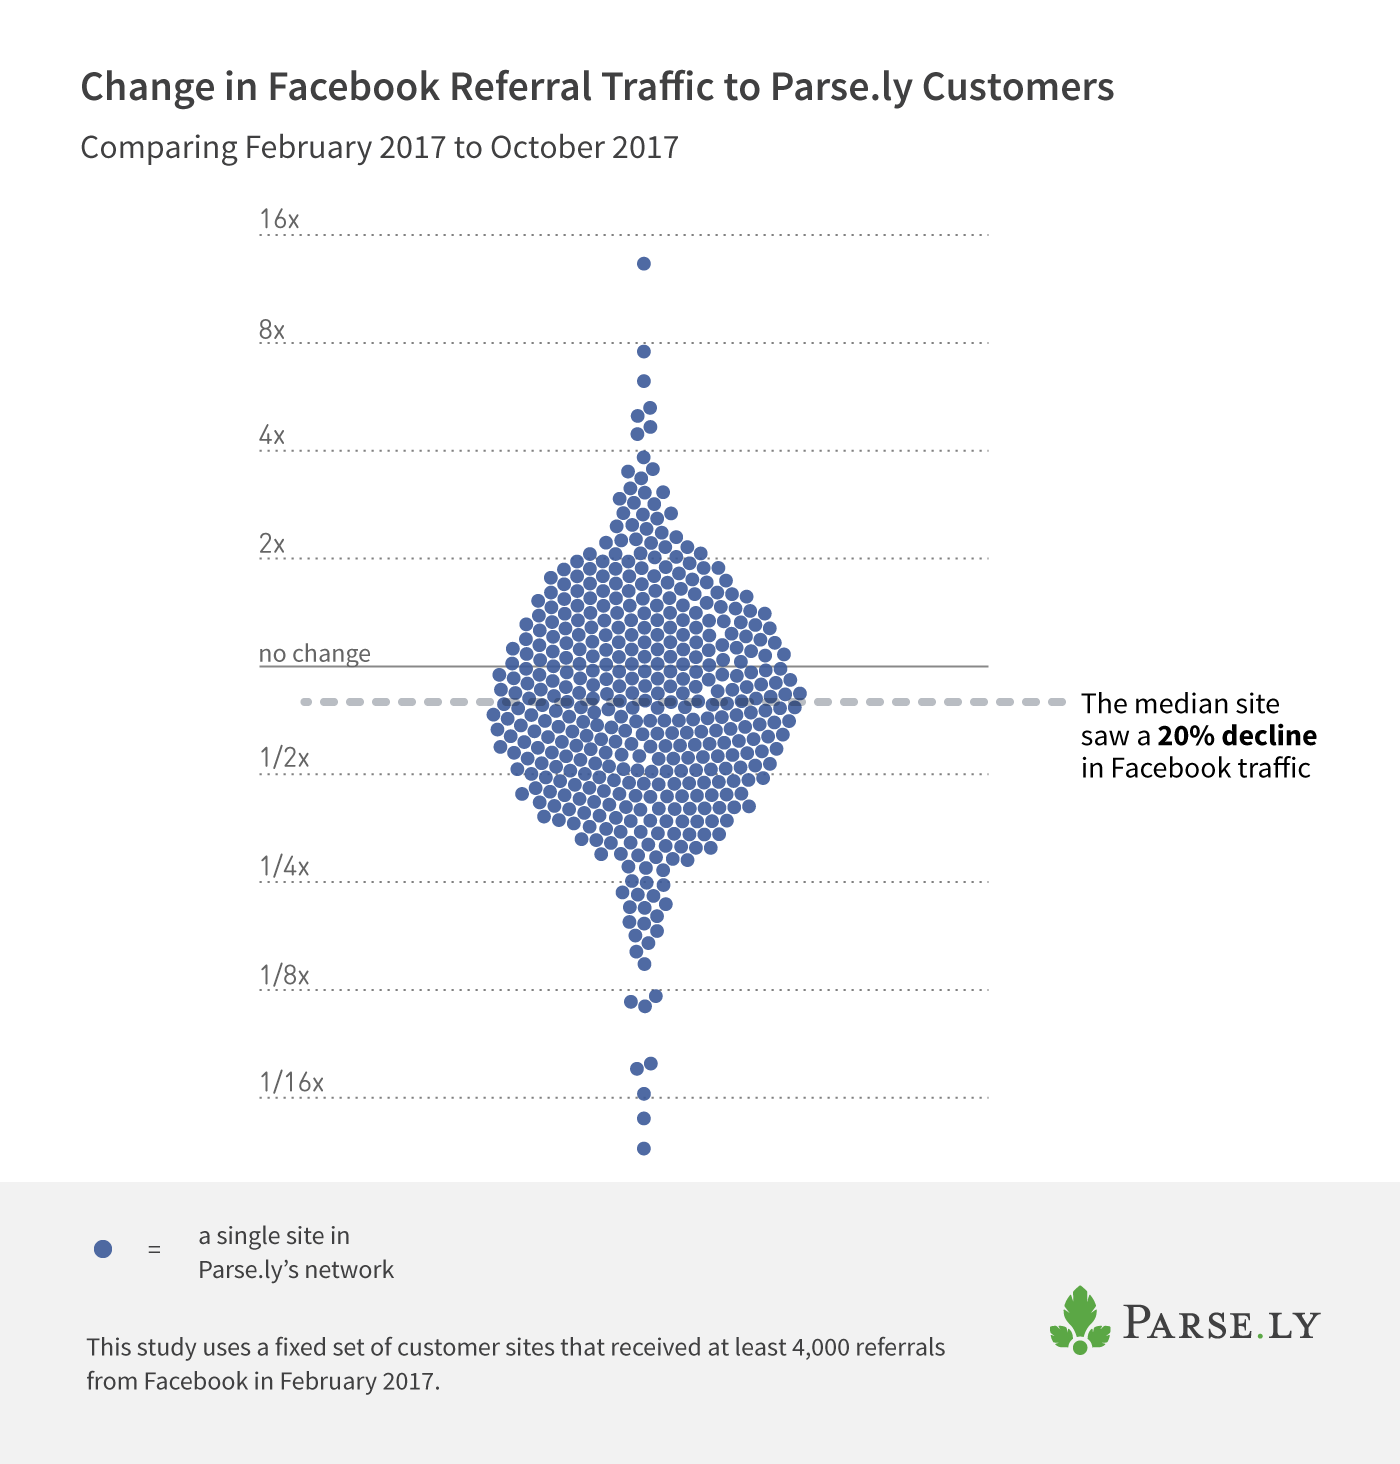 change in Facebook referral traffic to publishers